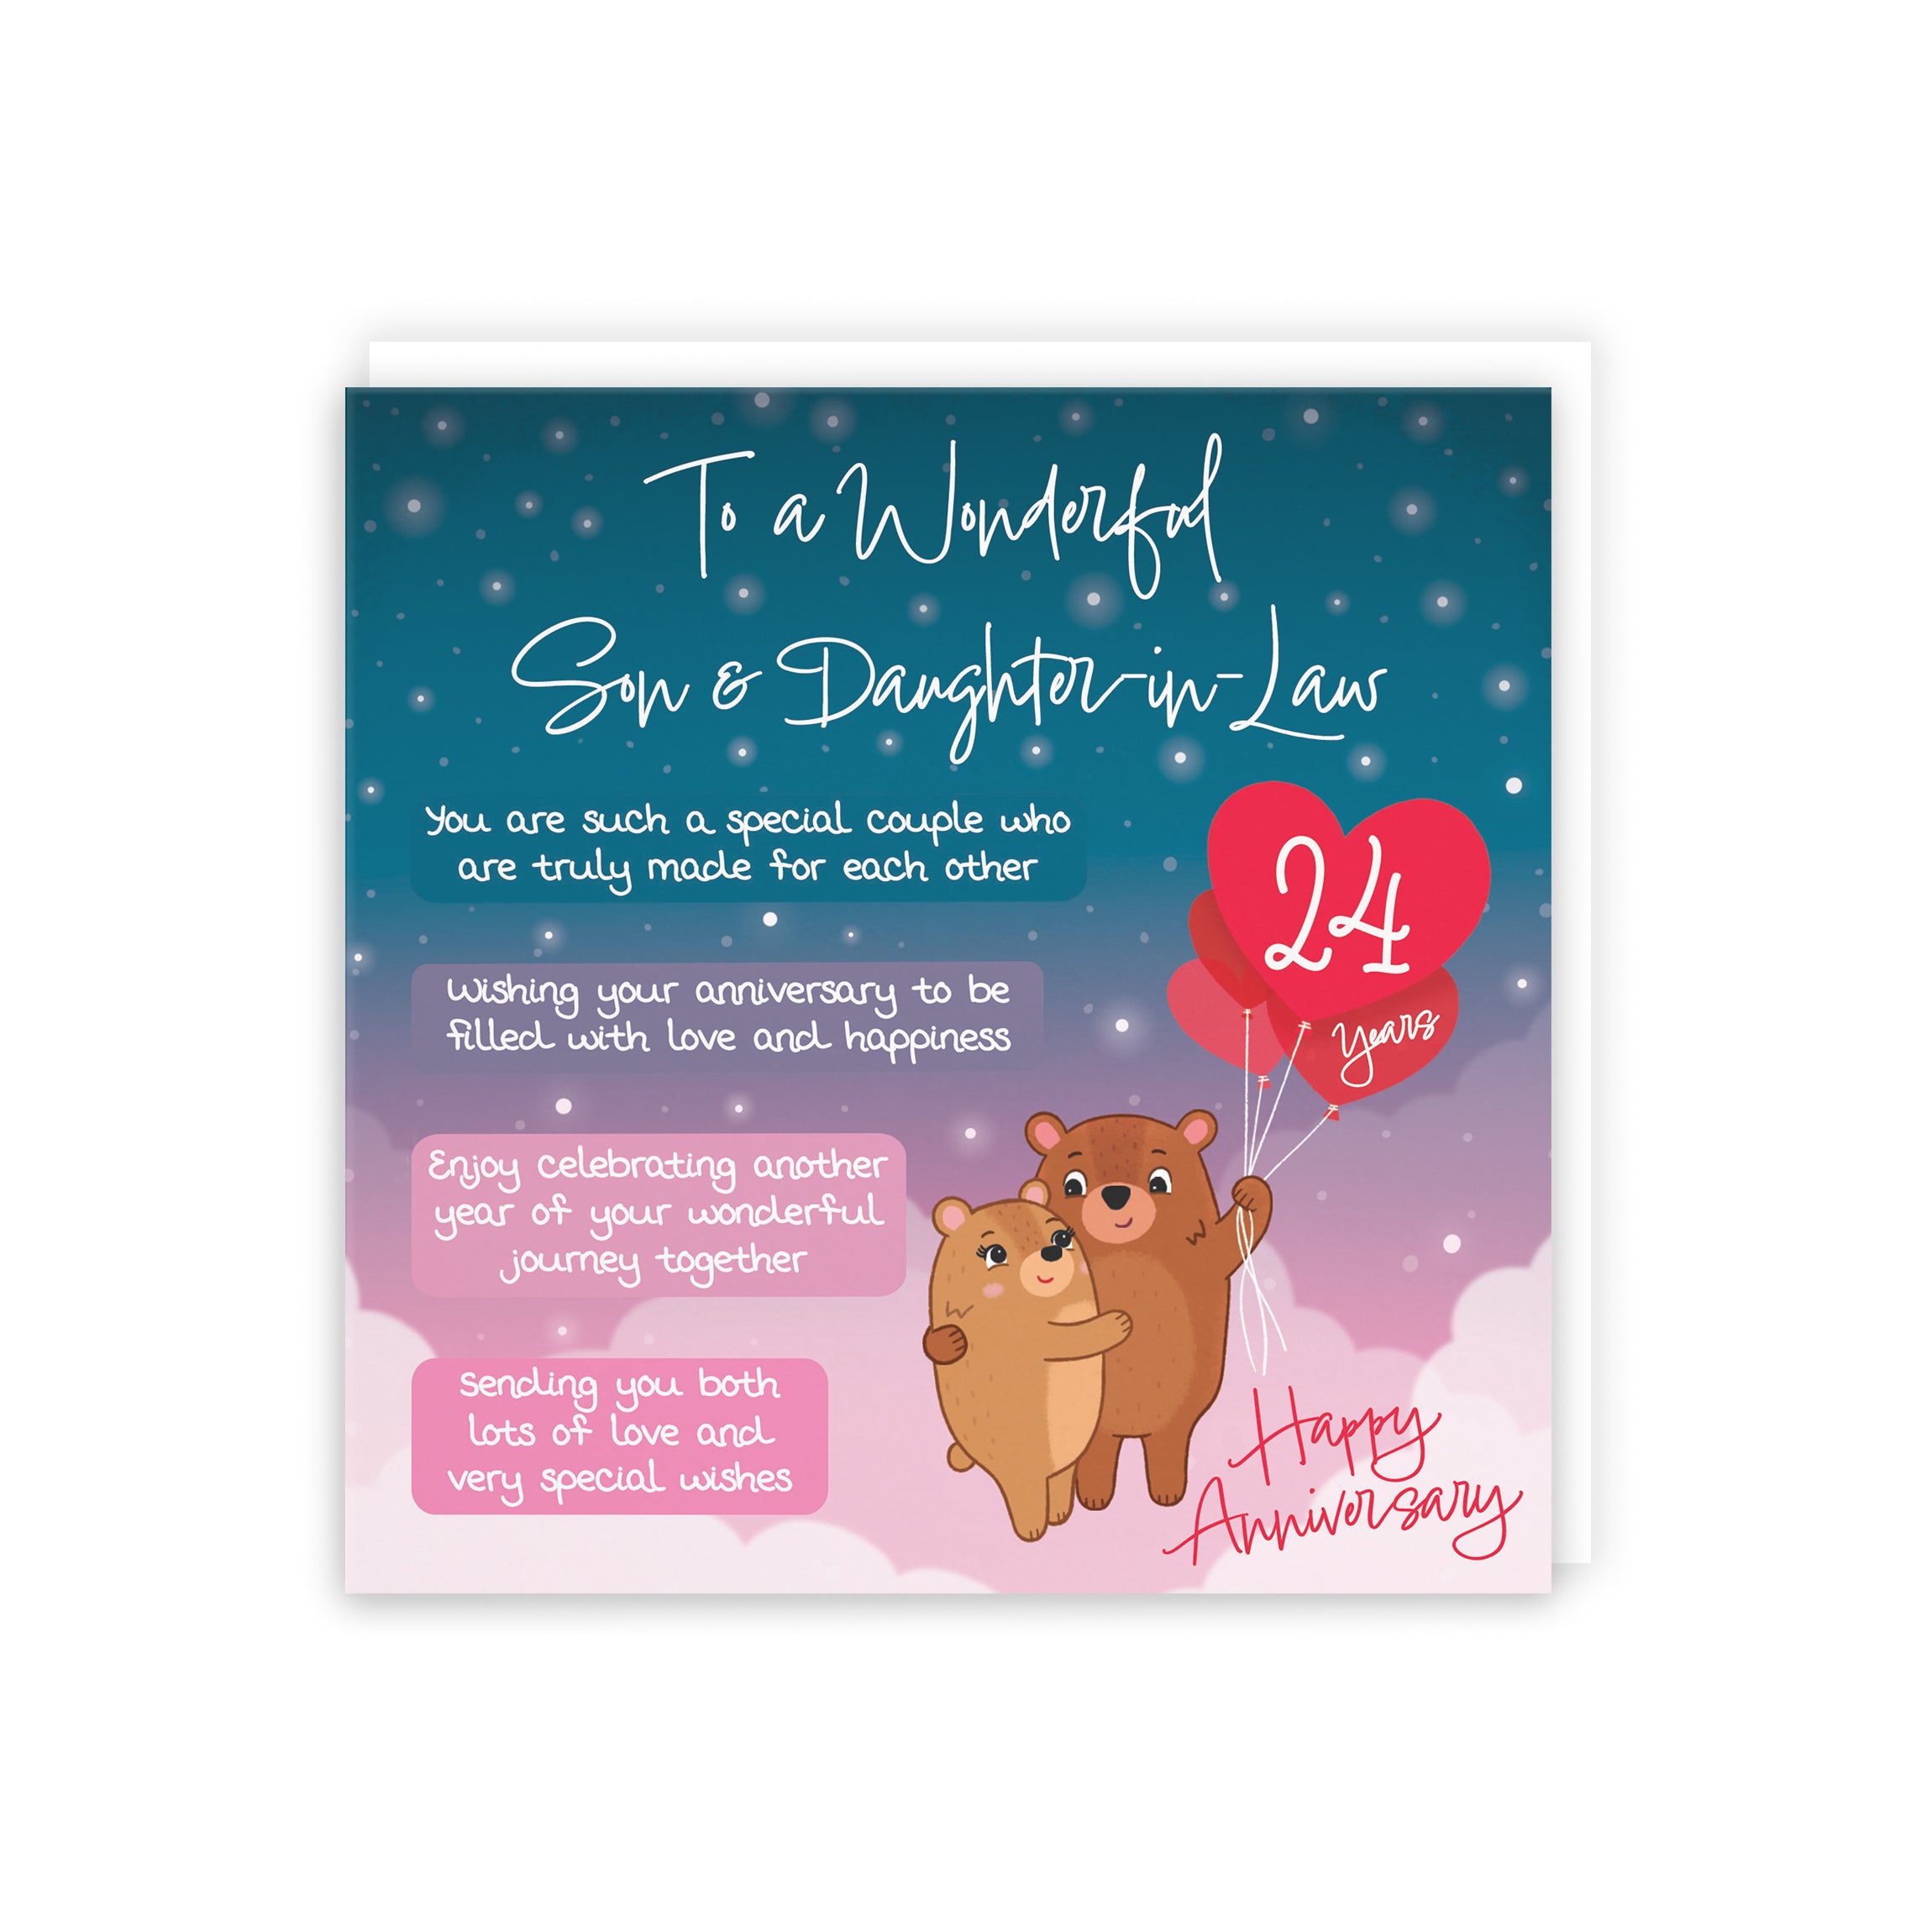 Son And Daughter In Law 24th Anniversary Card Starry Night Cute Bears